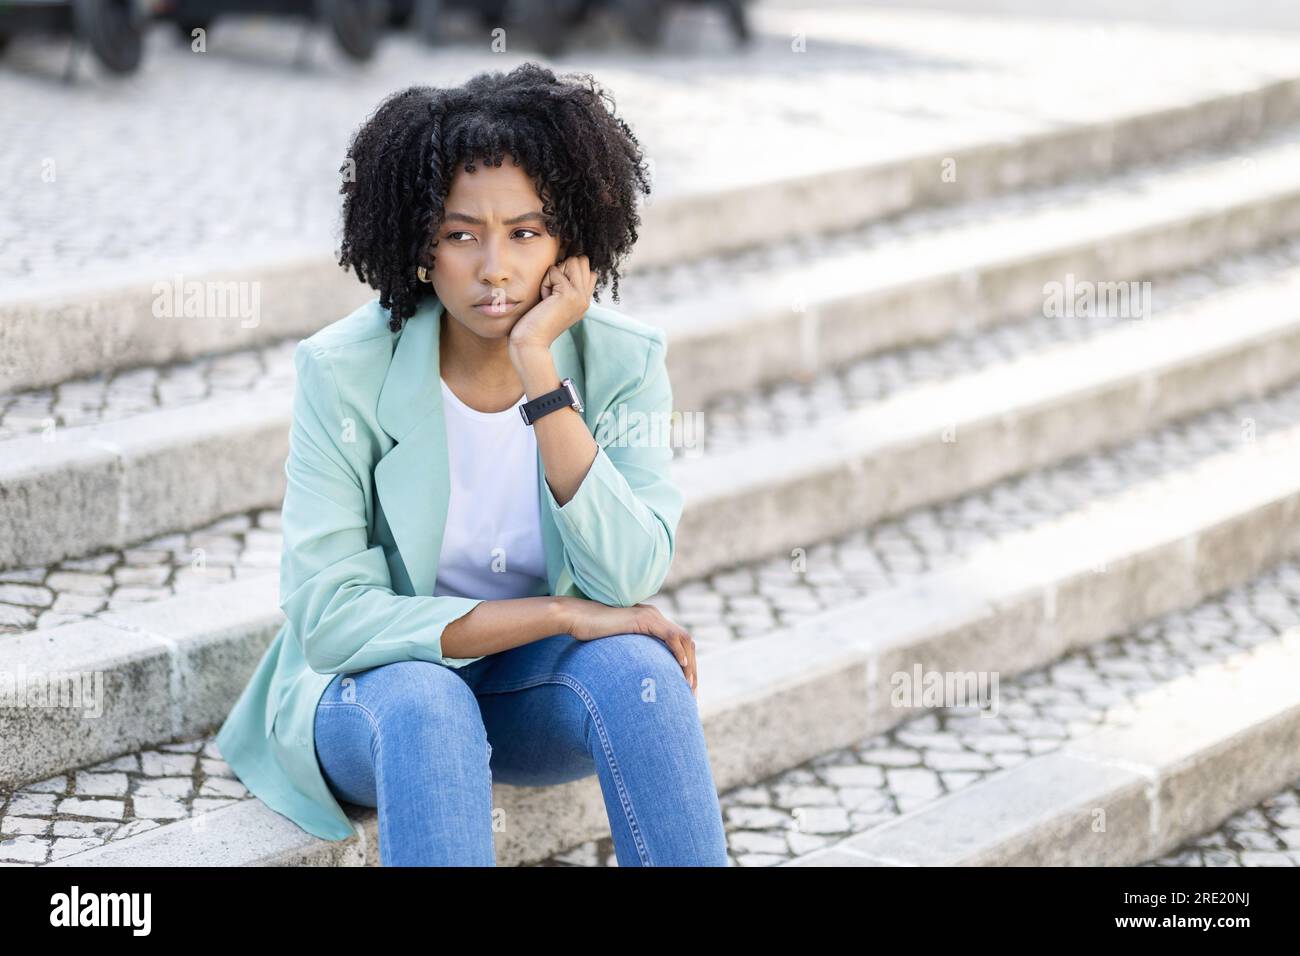 Unhappy frustrated pensive millennial black woman sitting on street Stock Photo